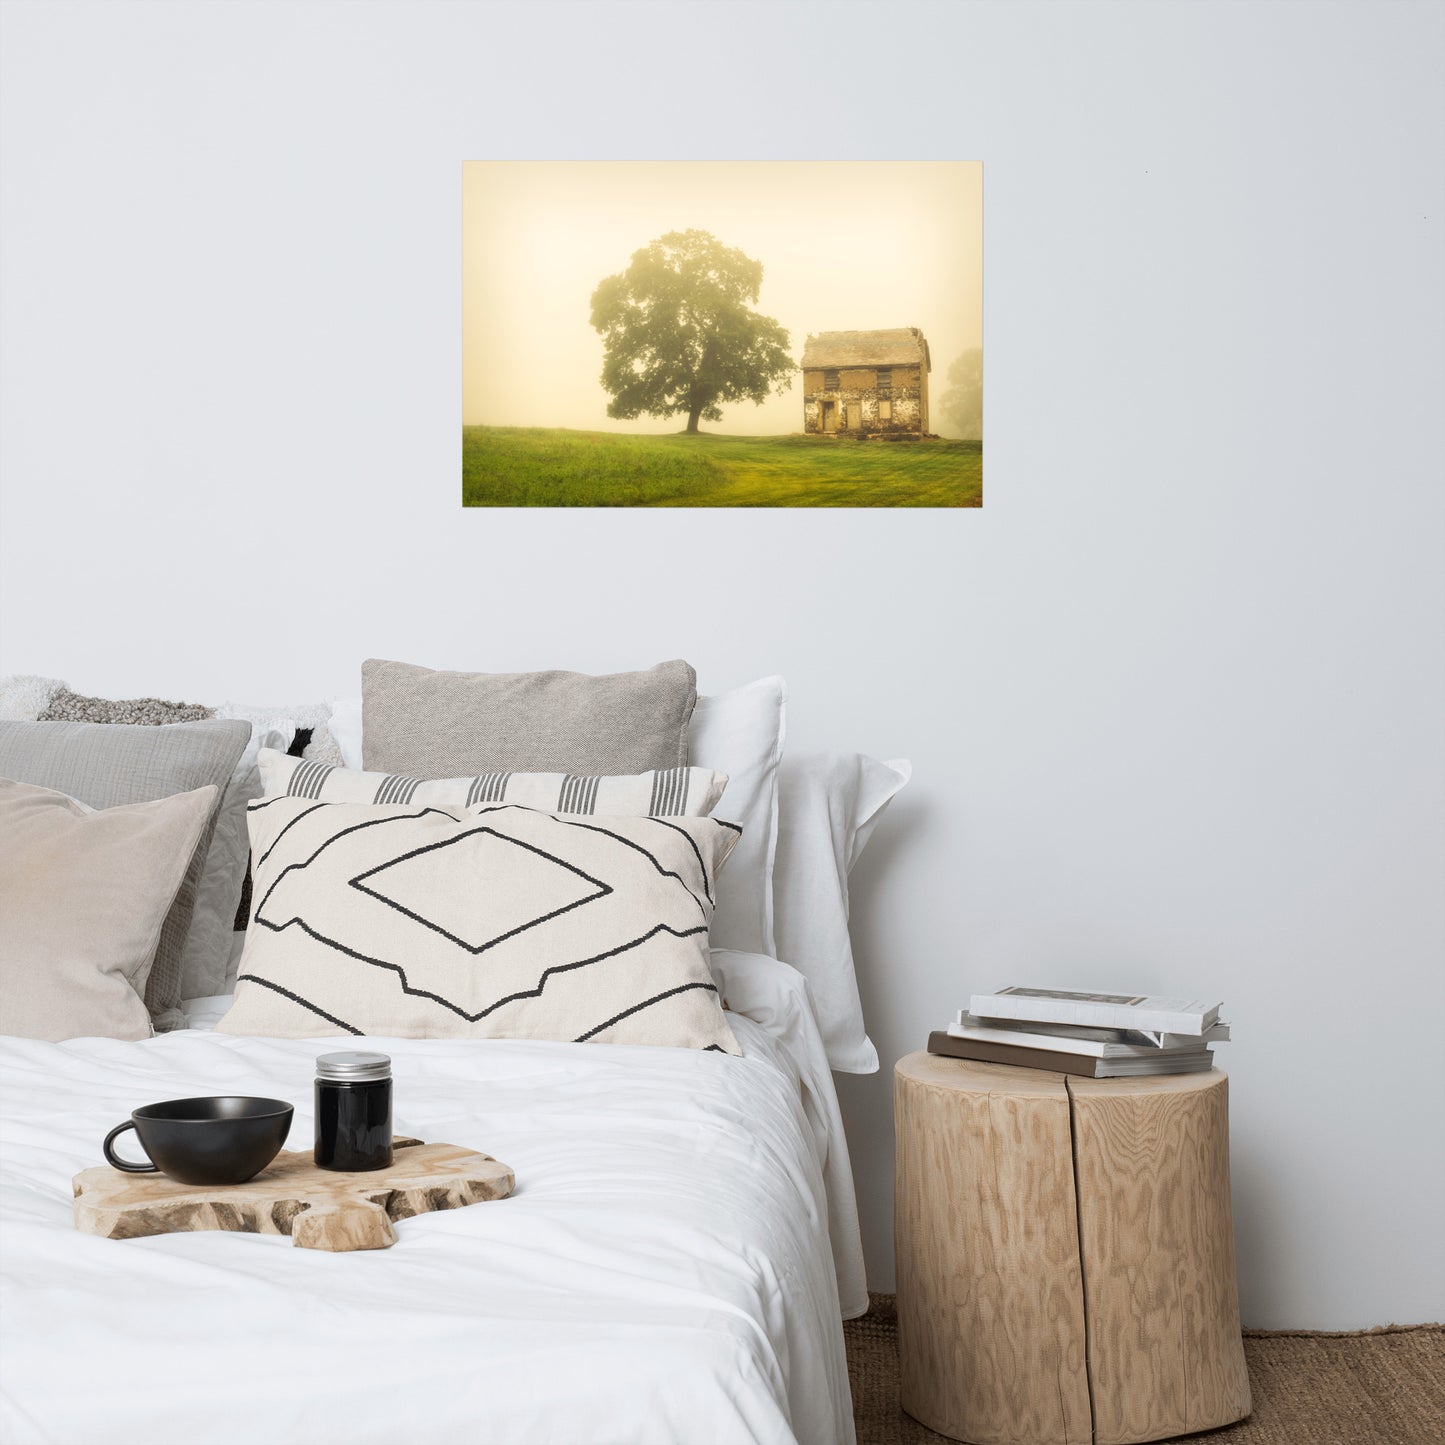 Country Wall Art For Bedroom: Old Farmhouse in Foggy Meadow Rustic - Rural / Country Style Landscape / Nature Photograph Loose / Unframed / Frameless / Frameable Wall Art Print - Artwork